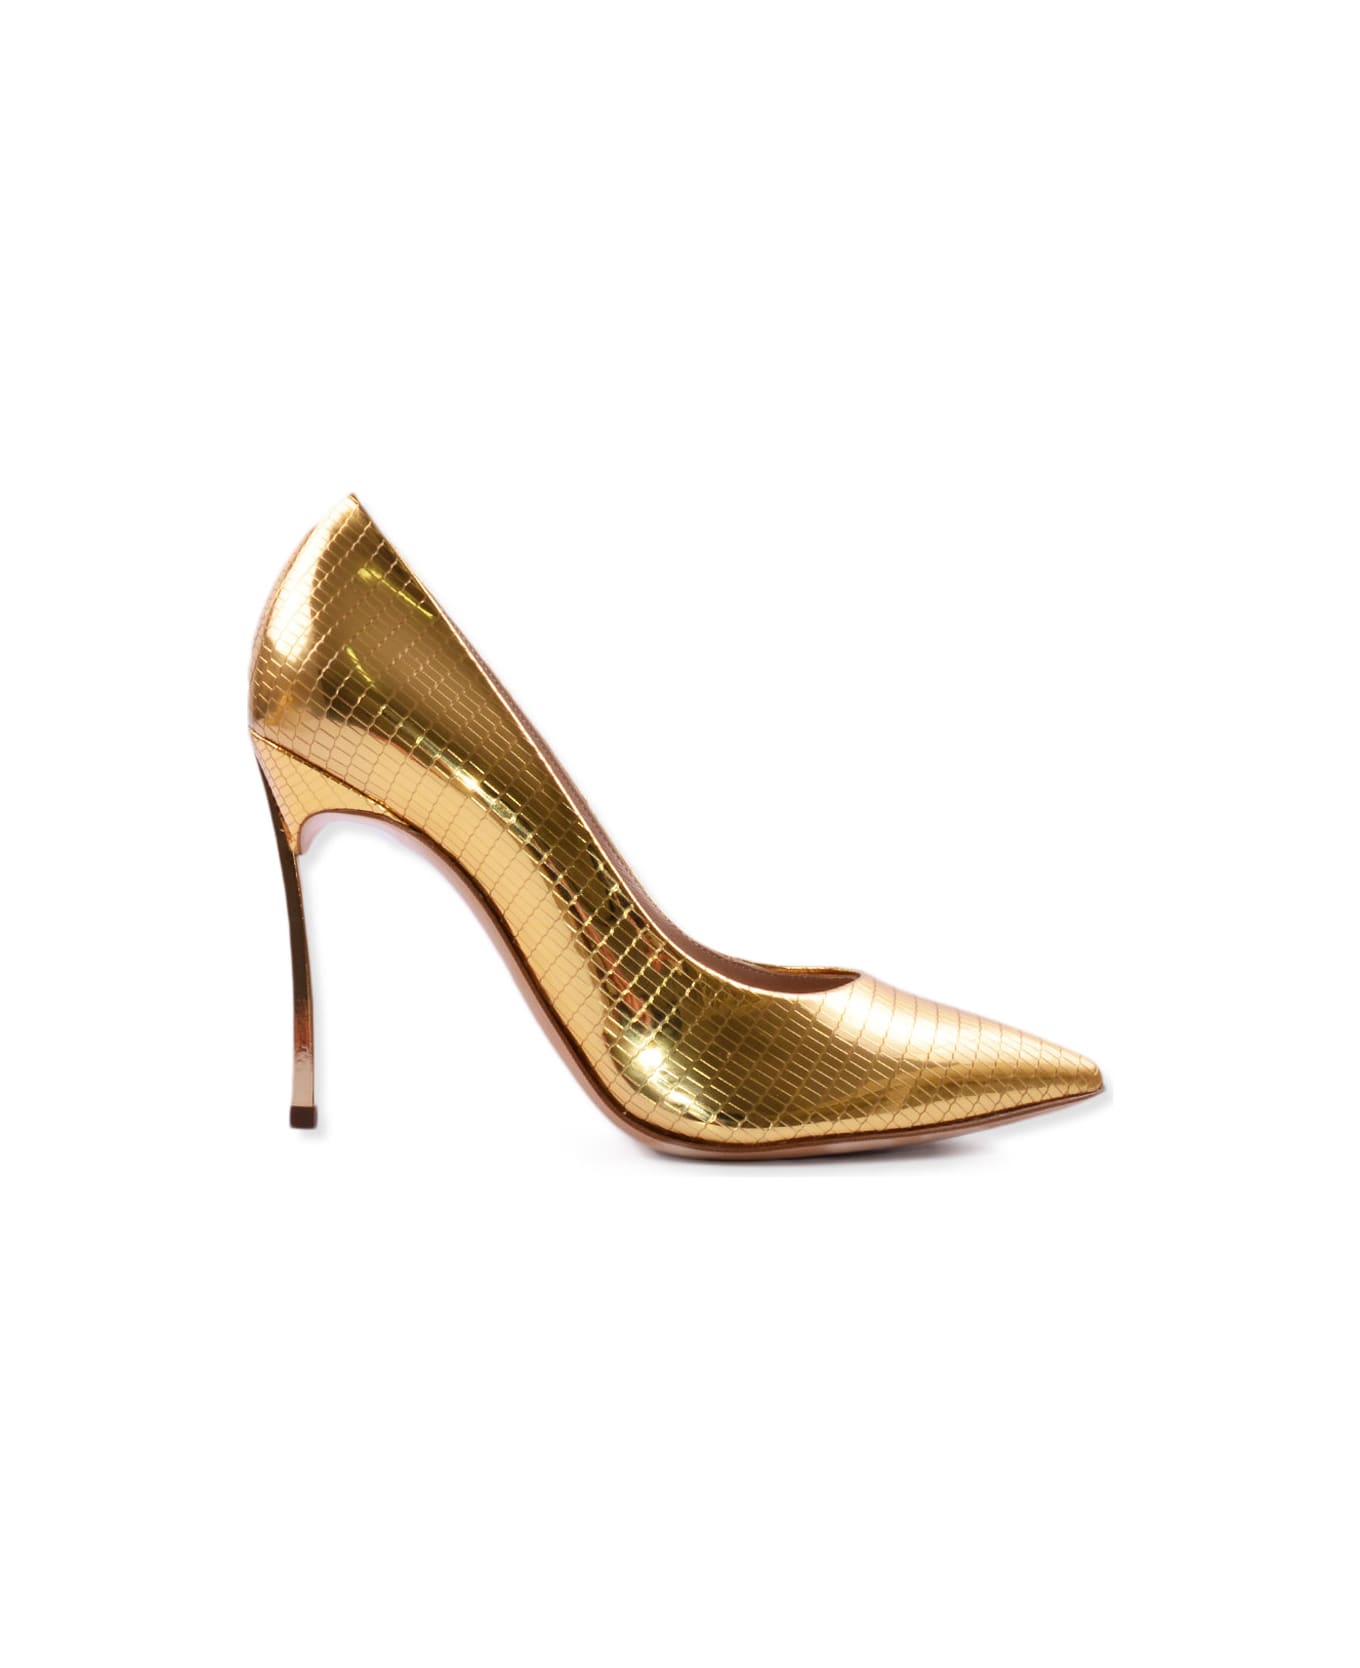 Casadei Shoes With Heels - Golden ハイヒール